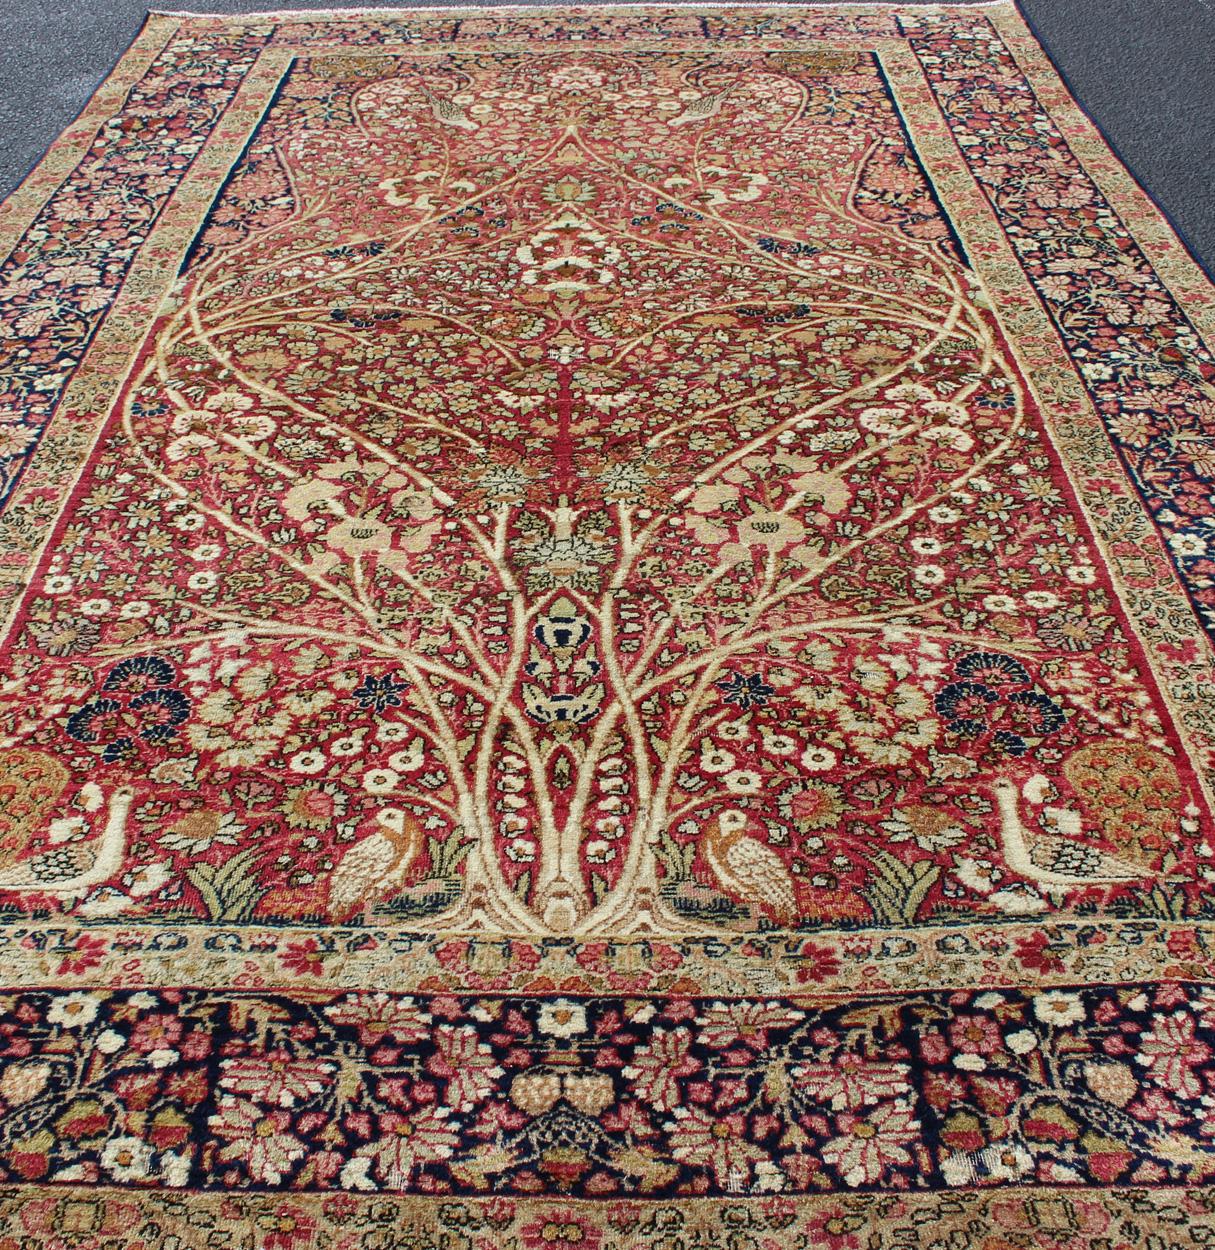 Very Fine Antique Persian Lavar Kerman Rug with Intricate Floral Design  For Sale 2